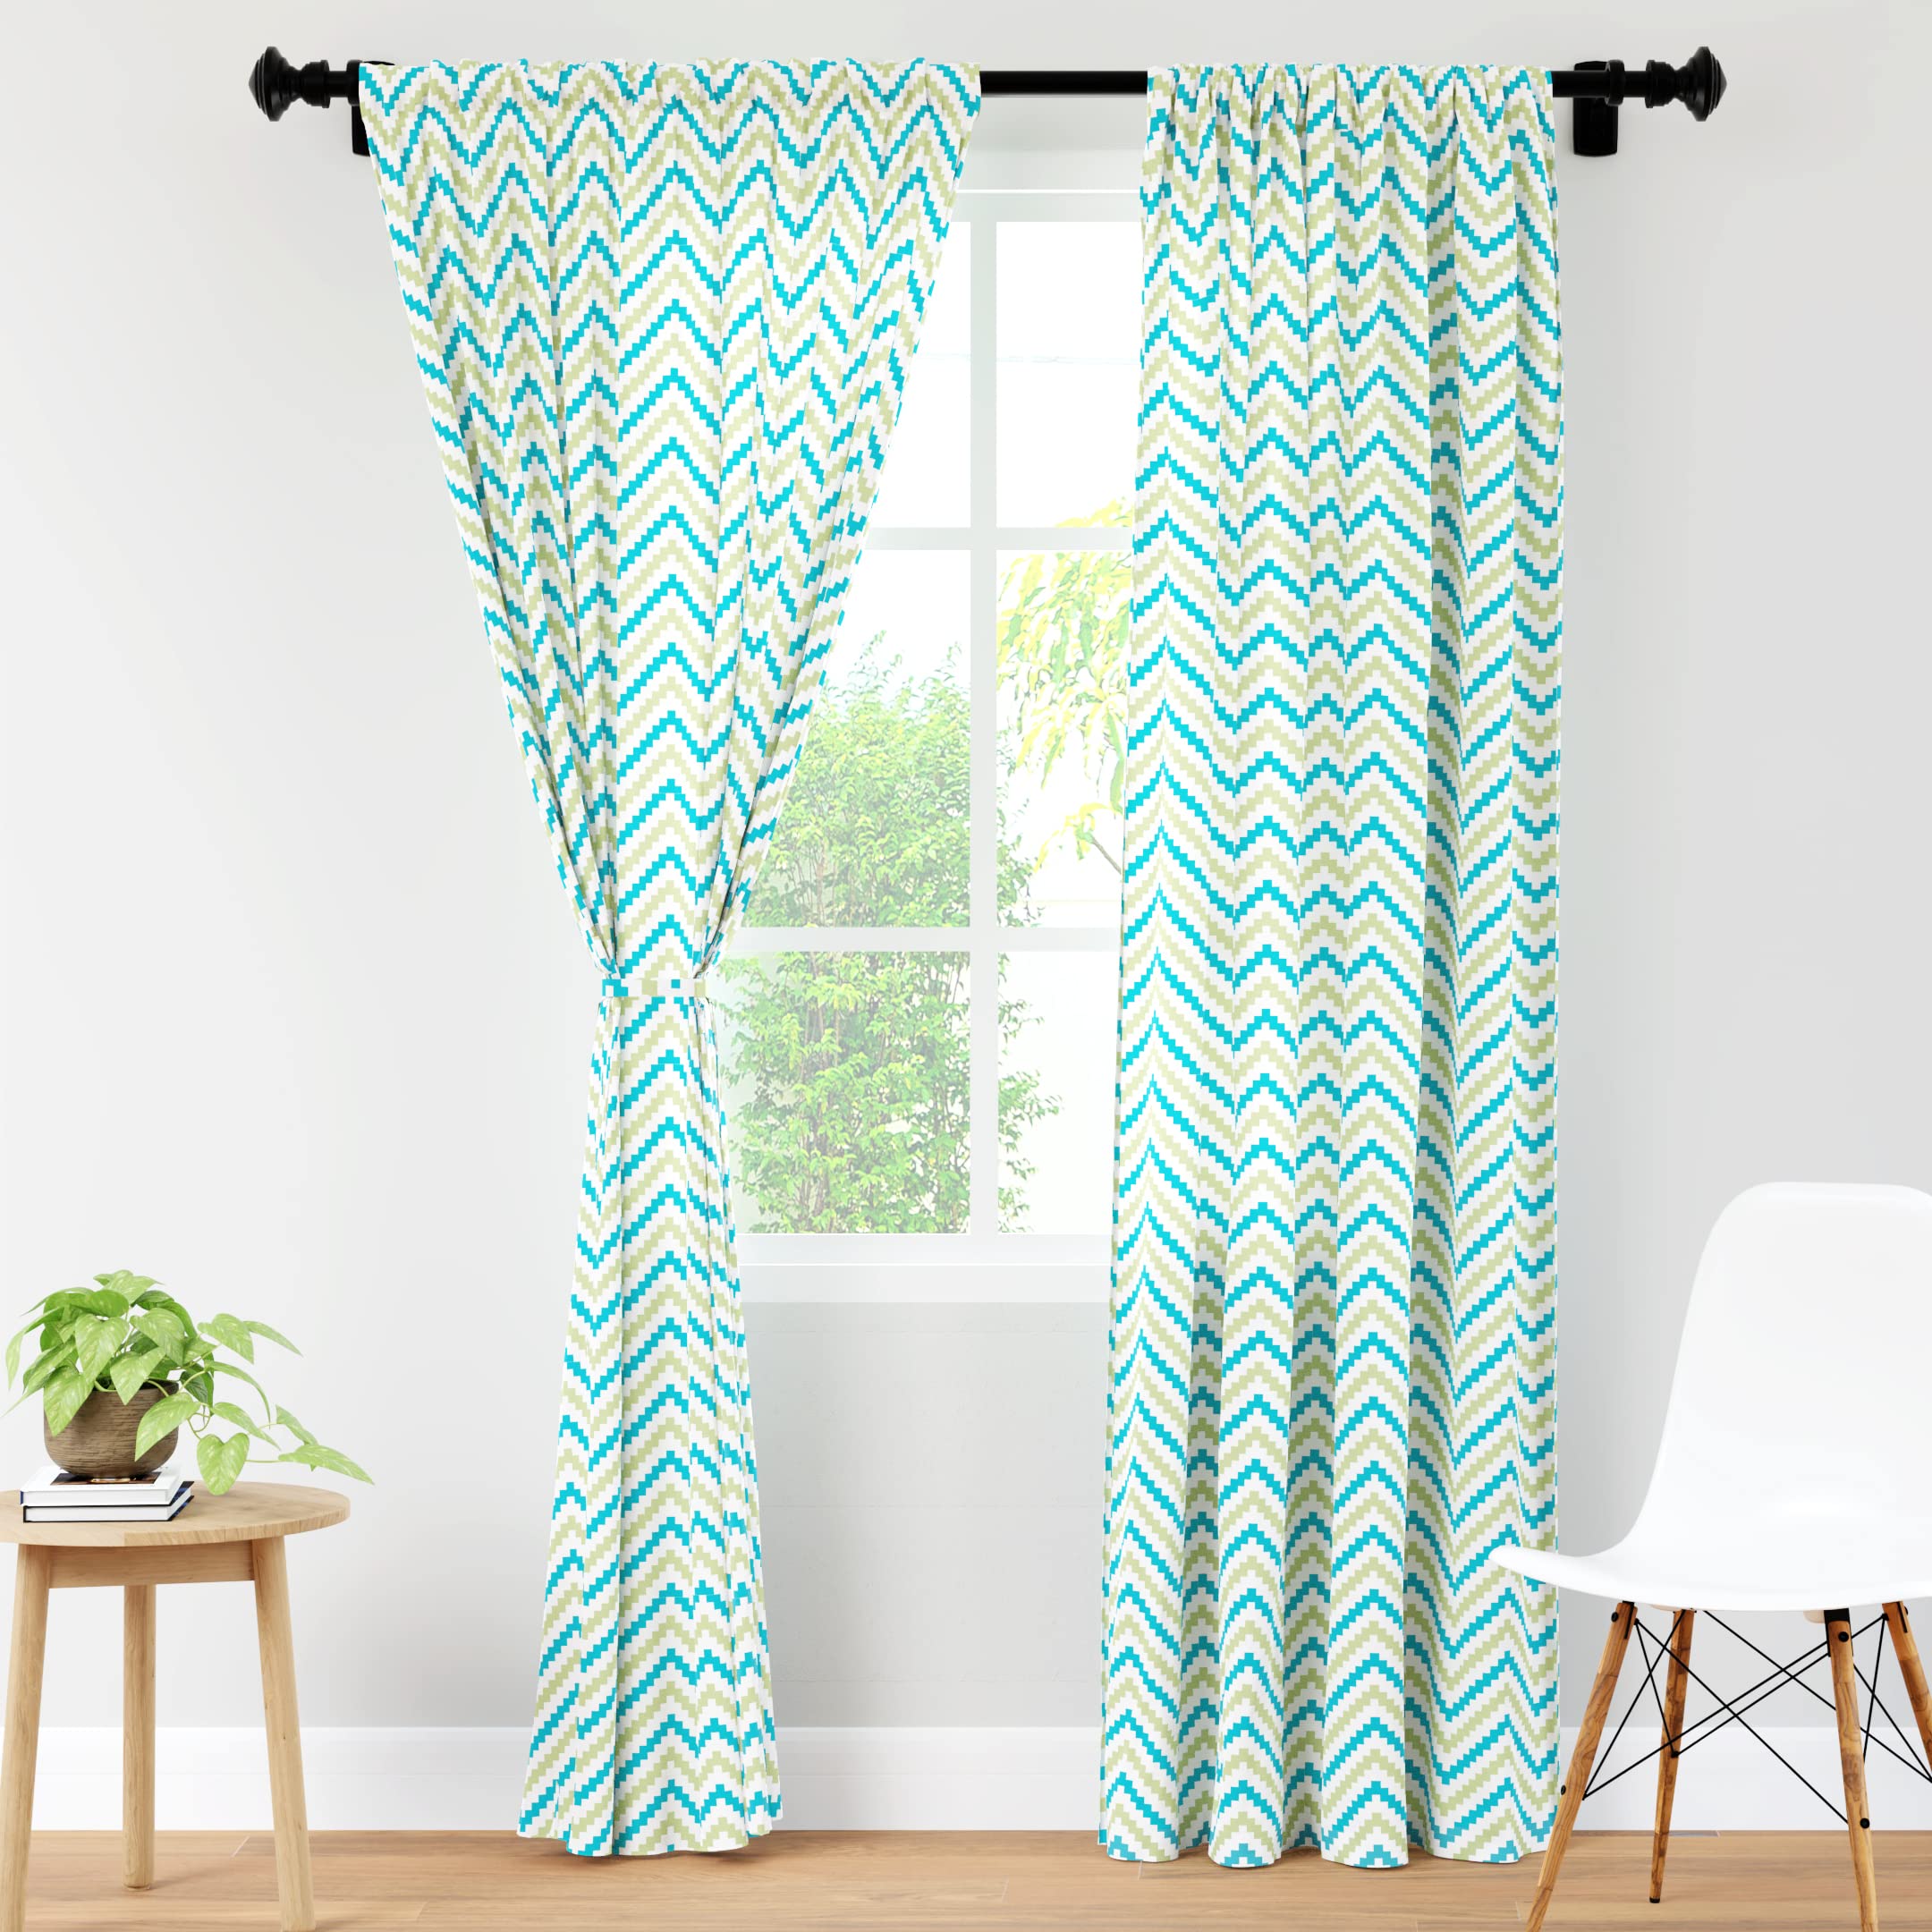 Encasa Homes Polyester Printed Long Door Curtain for 8 ft with Tie Back, Rod Pocket, Light-Filtering, Curtains for Kitchen, Bedroom, Living Room (140x244 cm), Chevron 1 Green, Set of 2